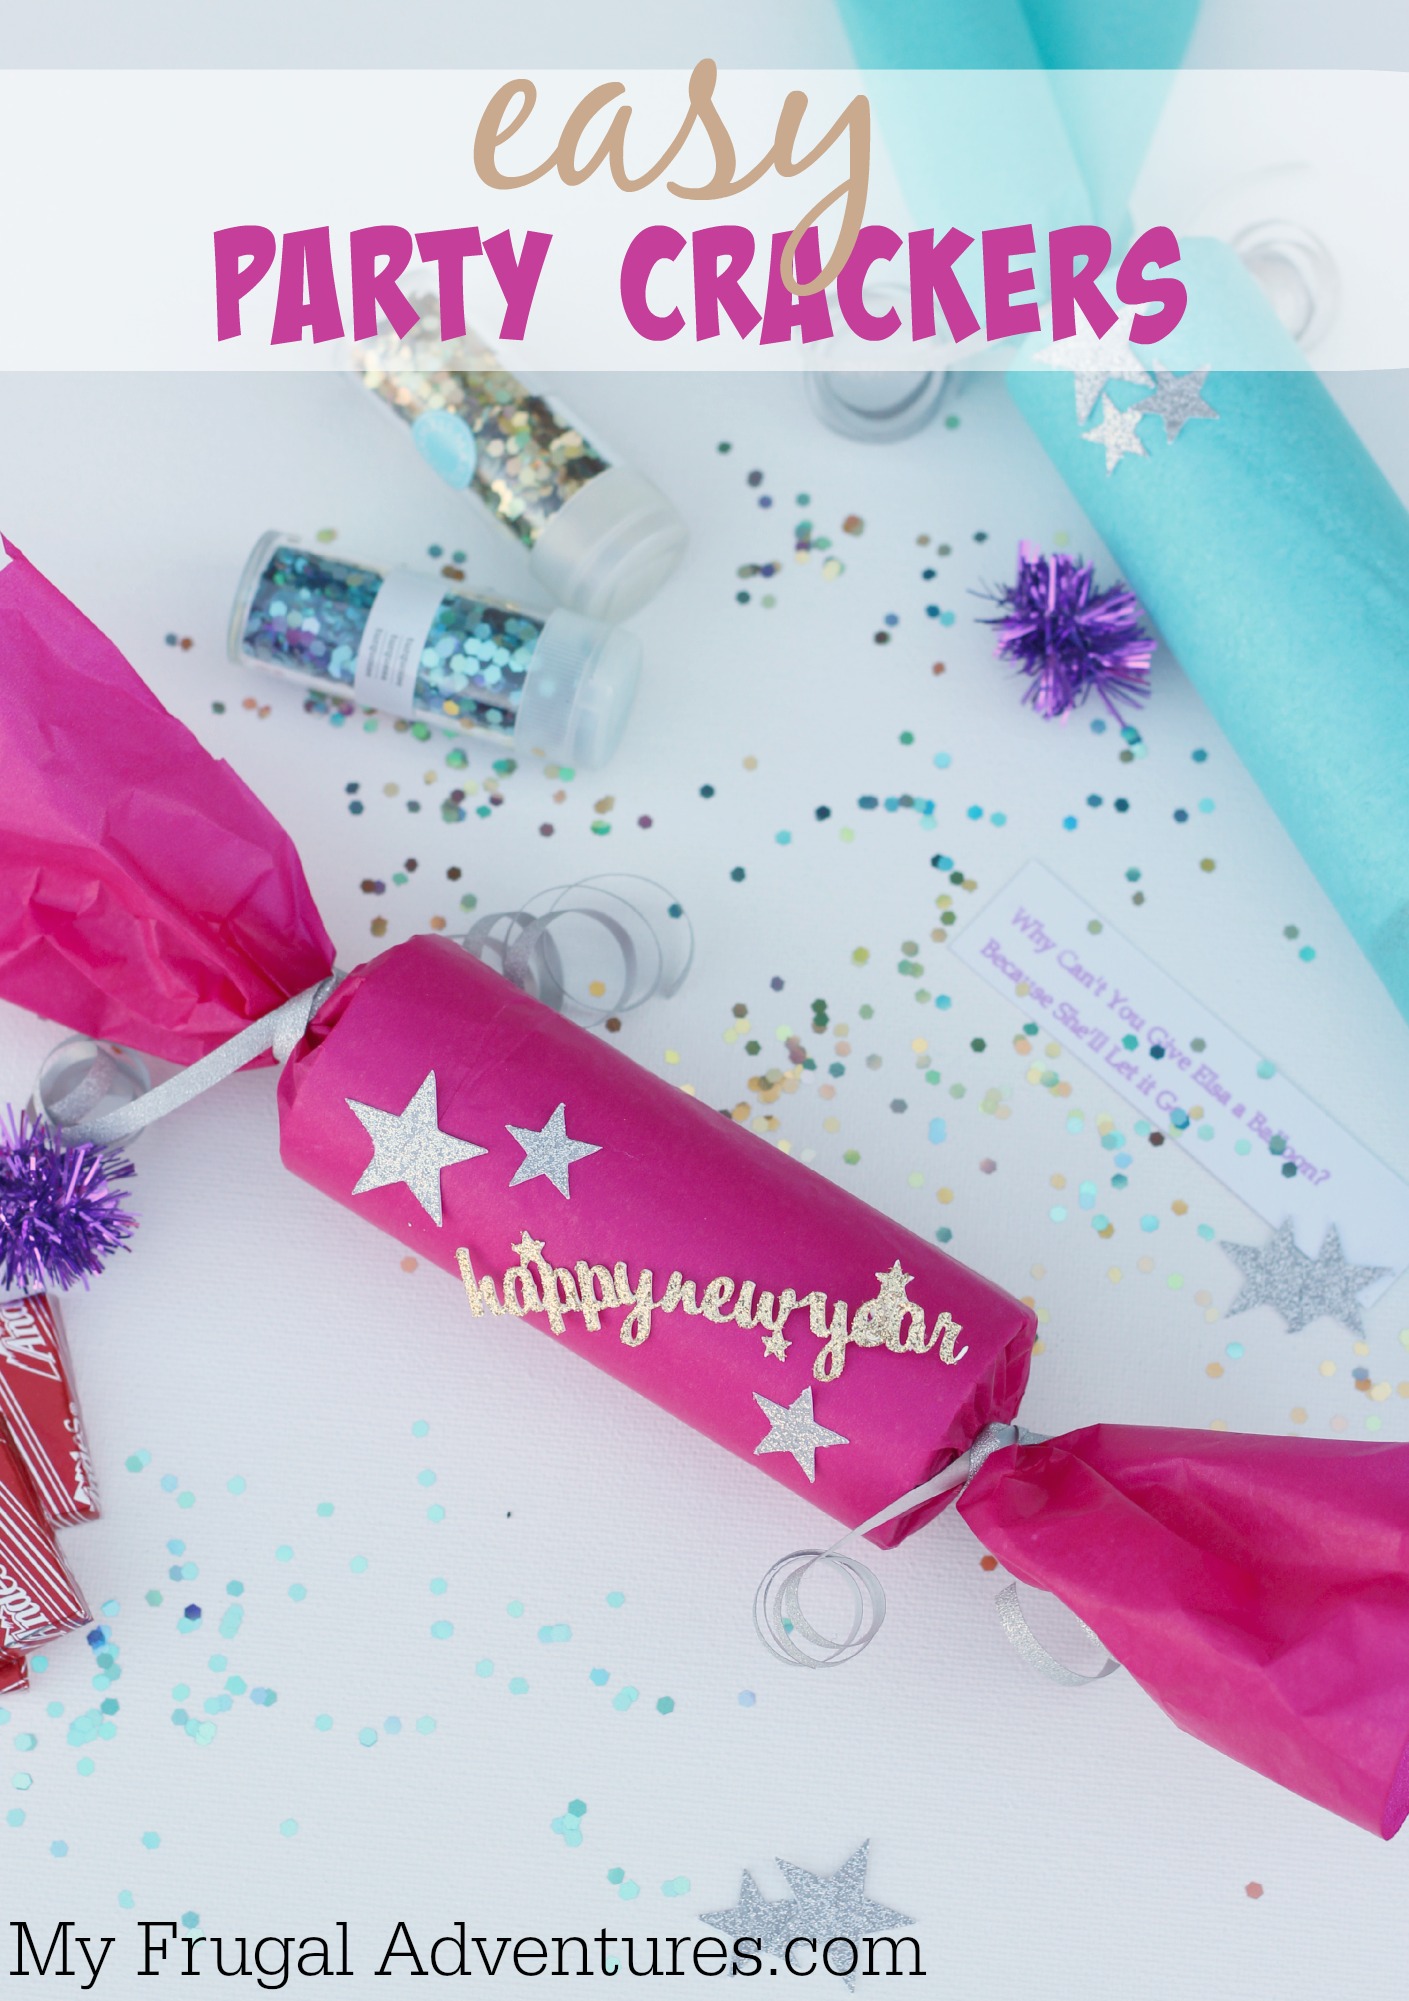 How to Make Party Crackers {So fun for kids!} - My Frugal Adventures